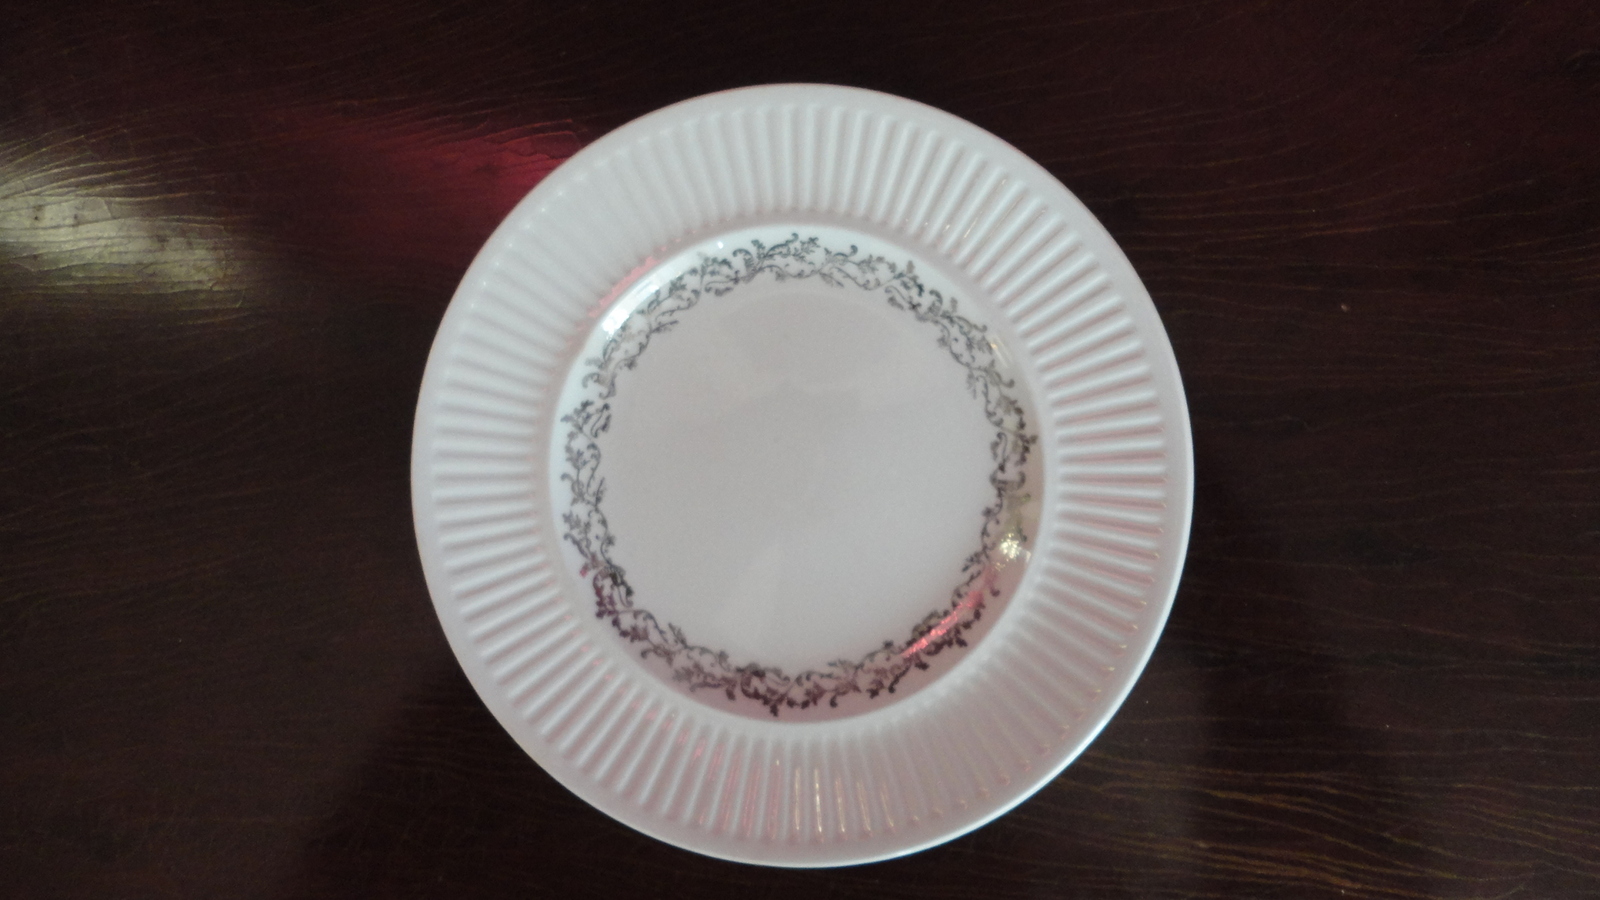 Johnson Brothers Deauville  Dinner Plate 10/"